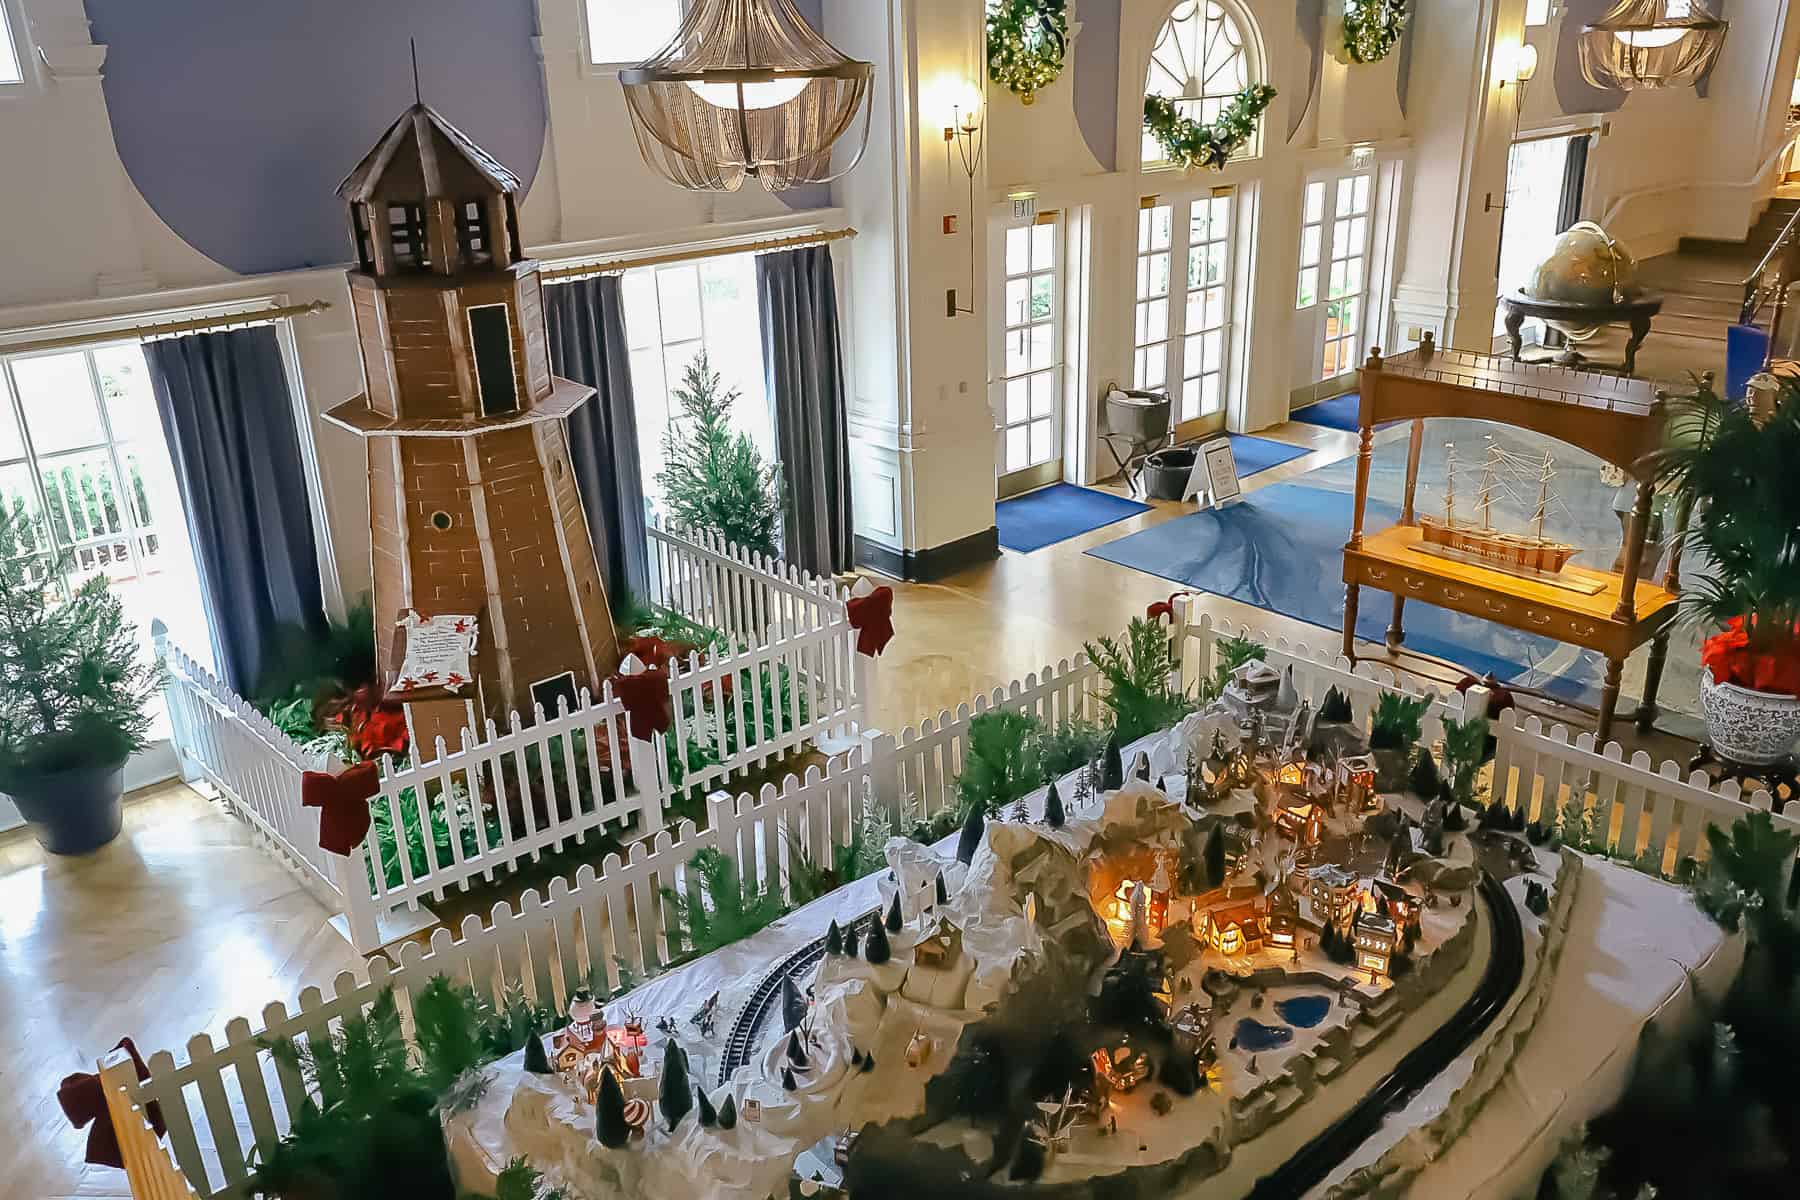 A view of the Yacht Club's lobby from the second floor showing the gingerbread display and train set.